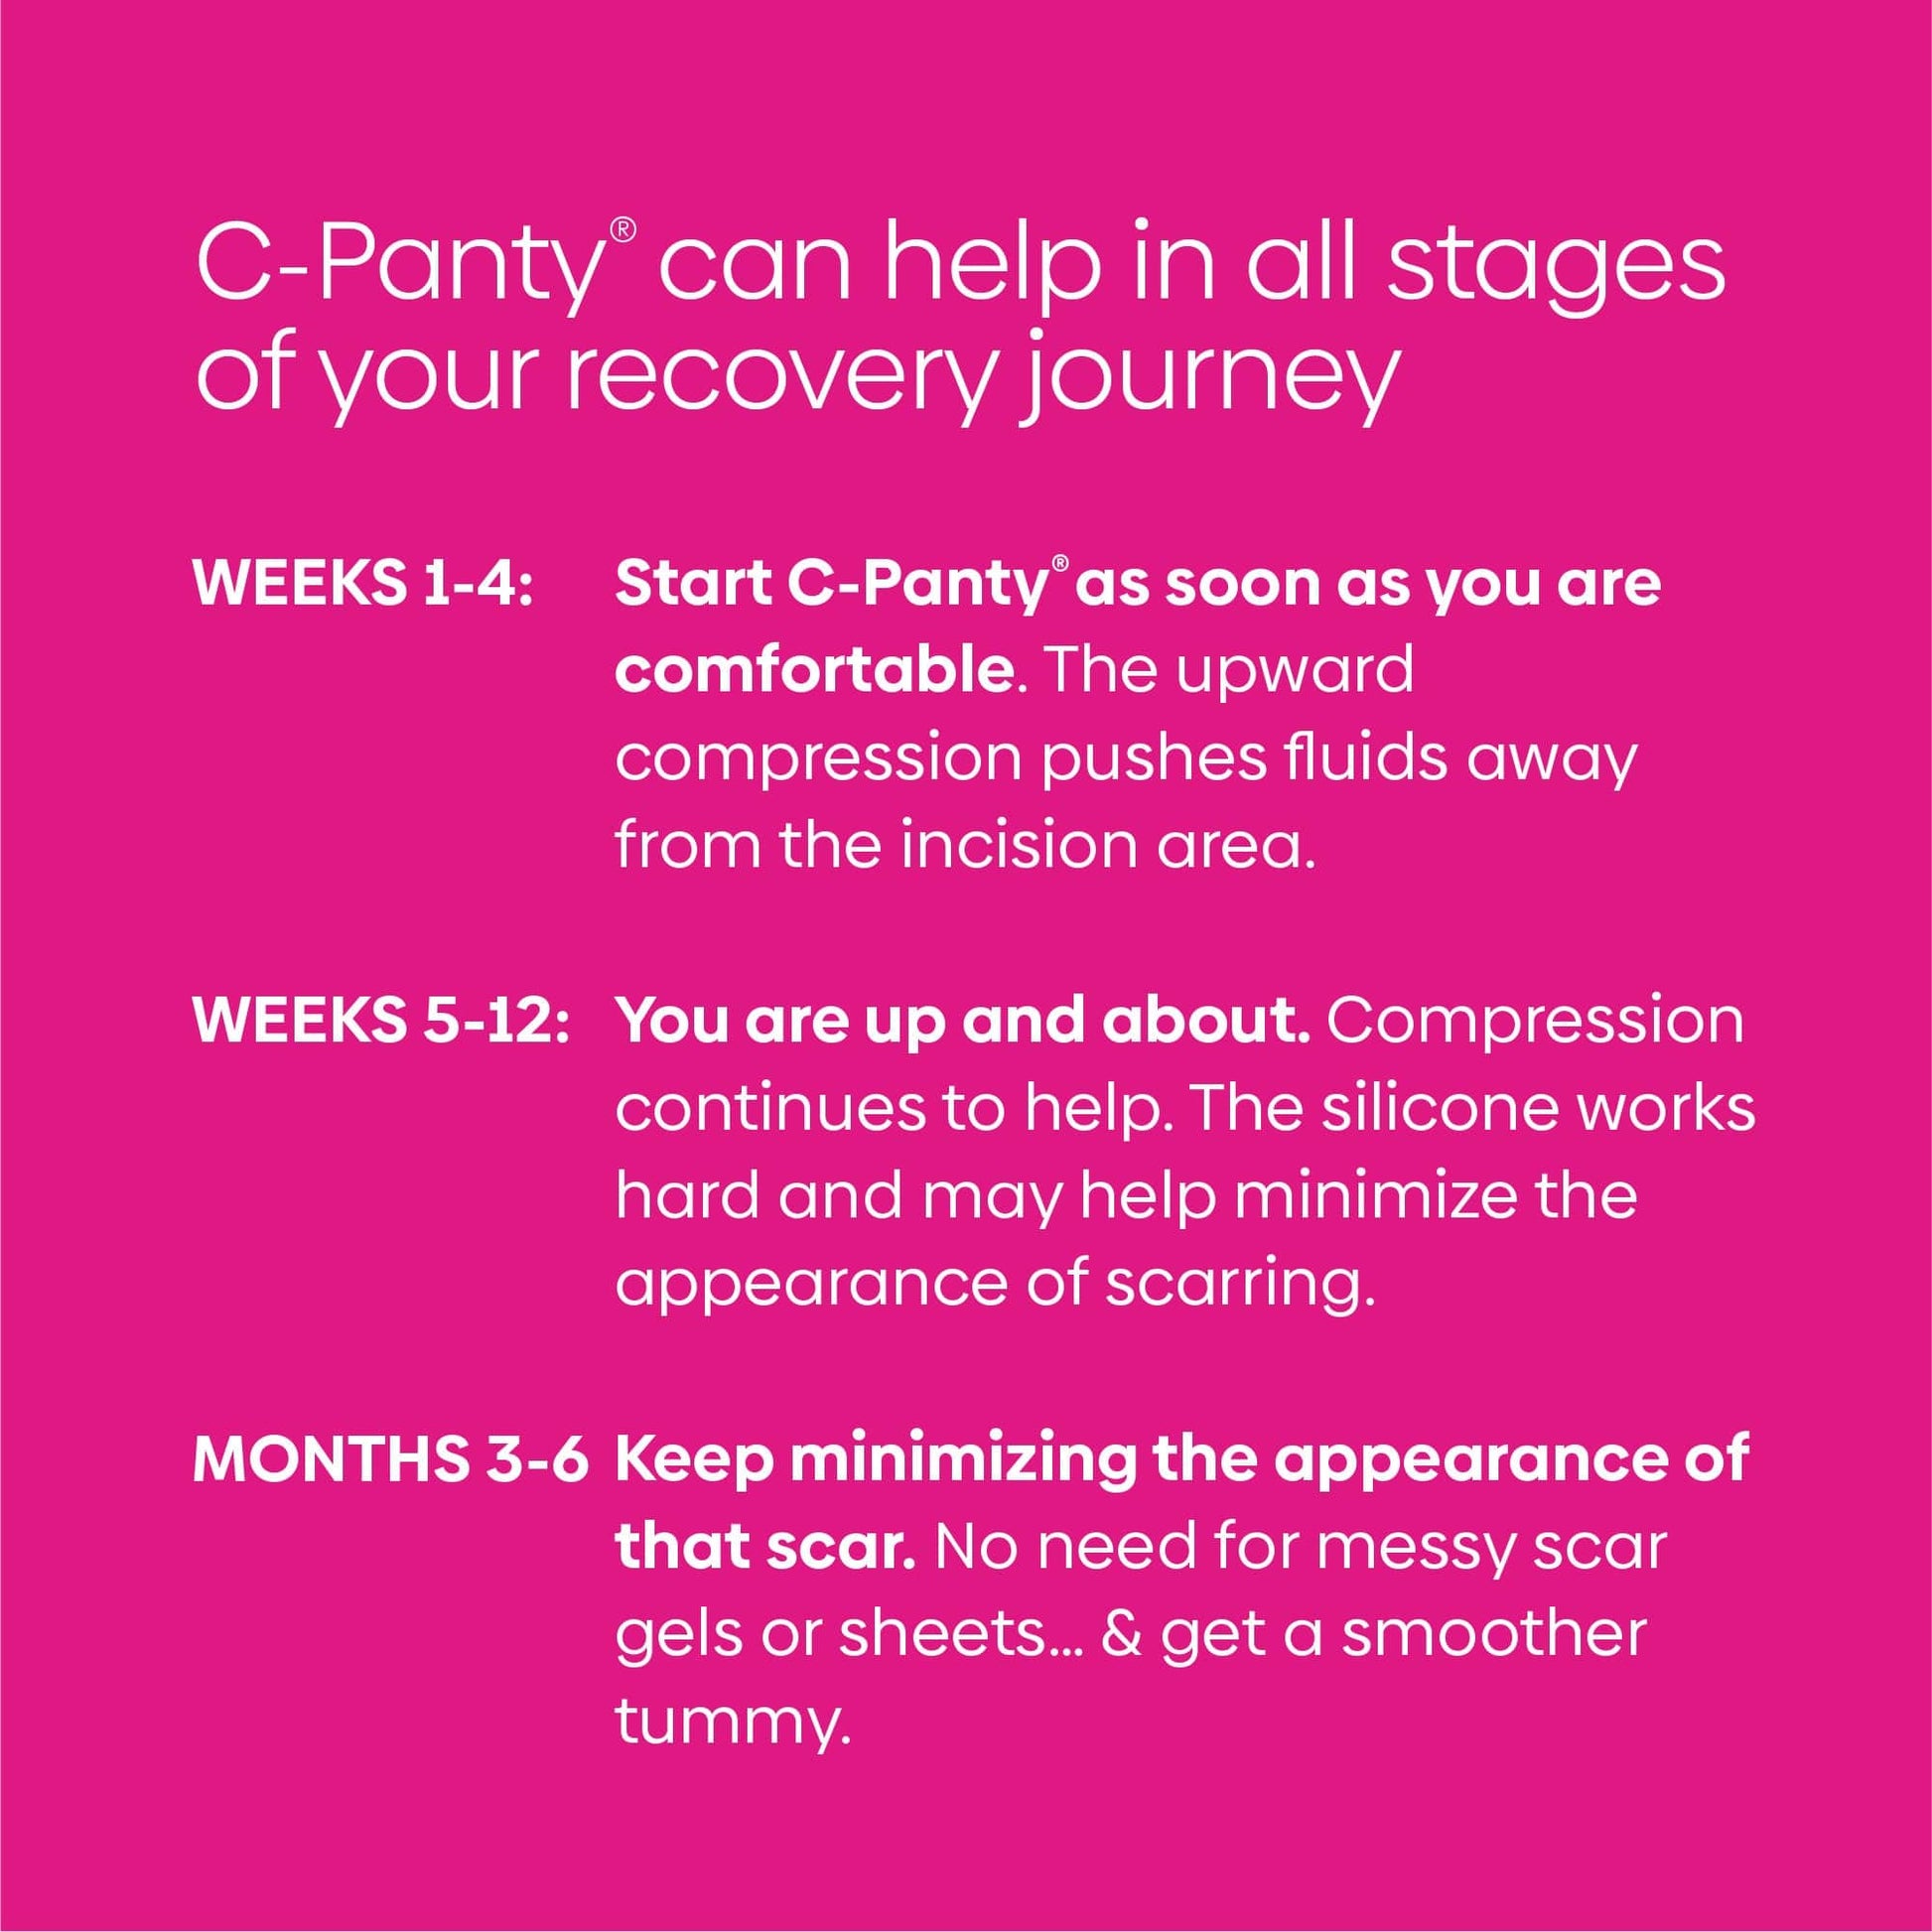 C Panty can help in all stages of your recovery journey, Week 1 through month 6